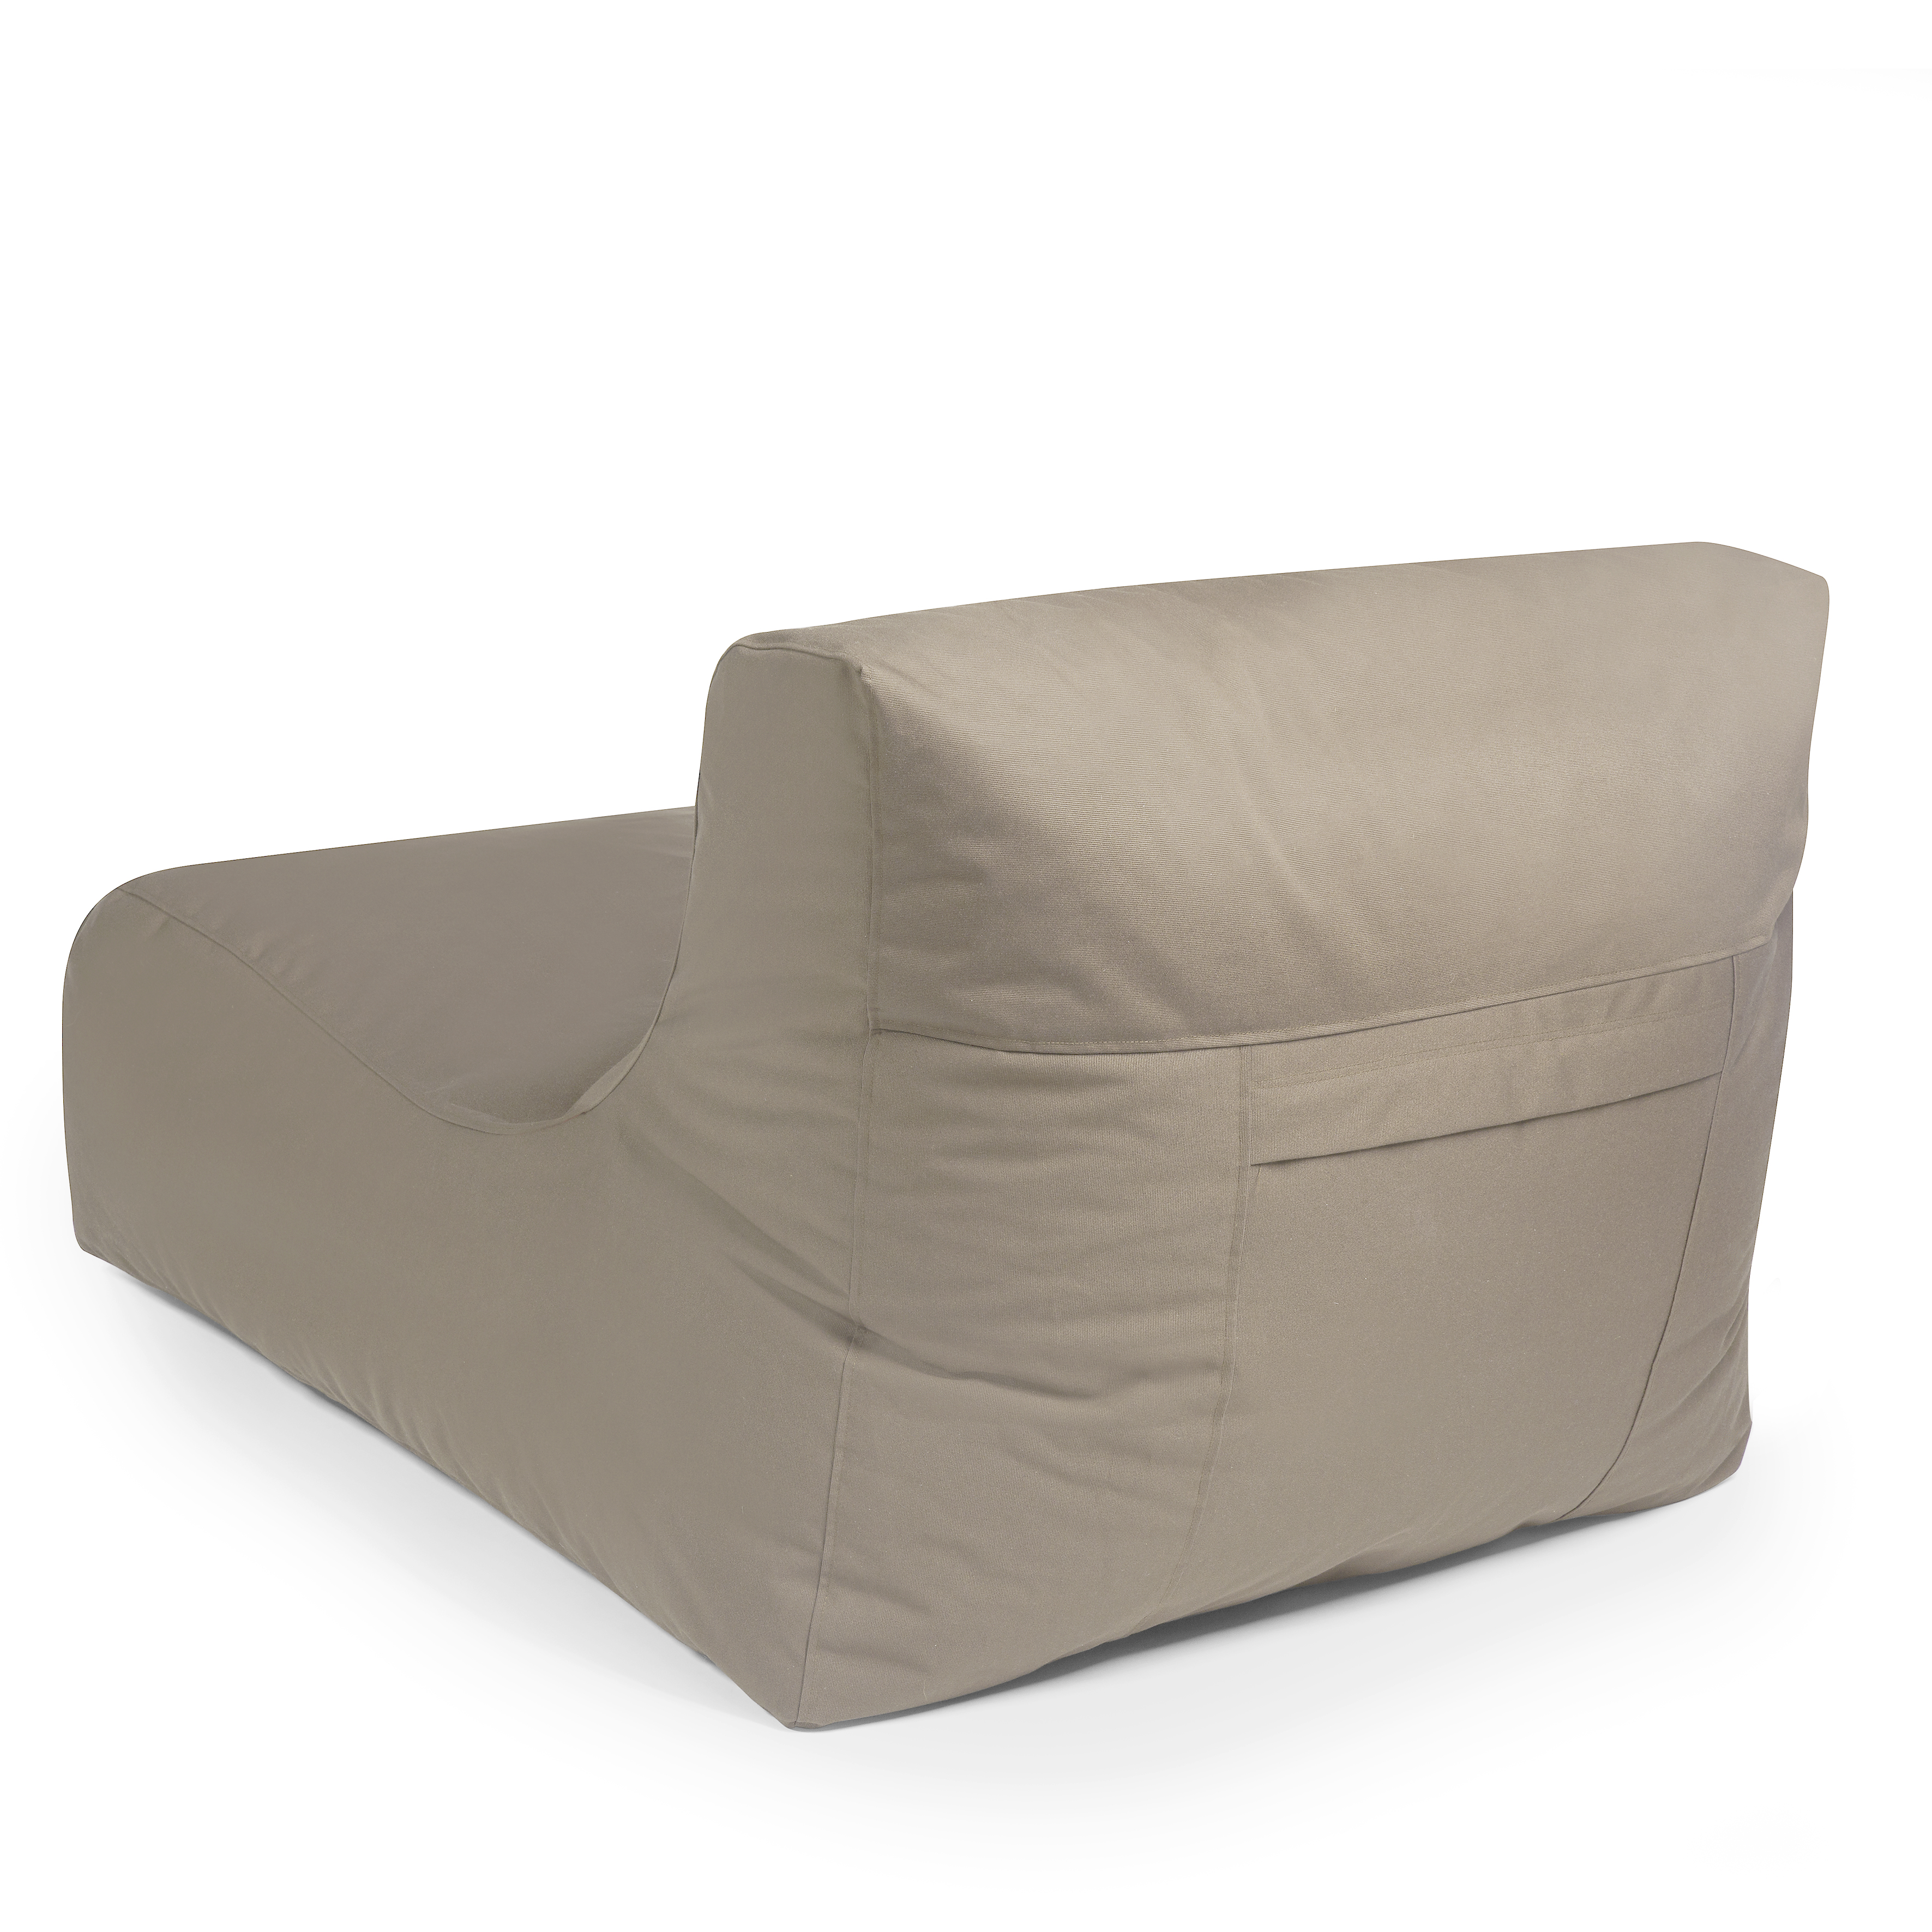 OUTBAG | Outdoor-Liege | NEWLOUNGE